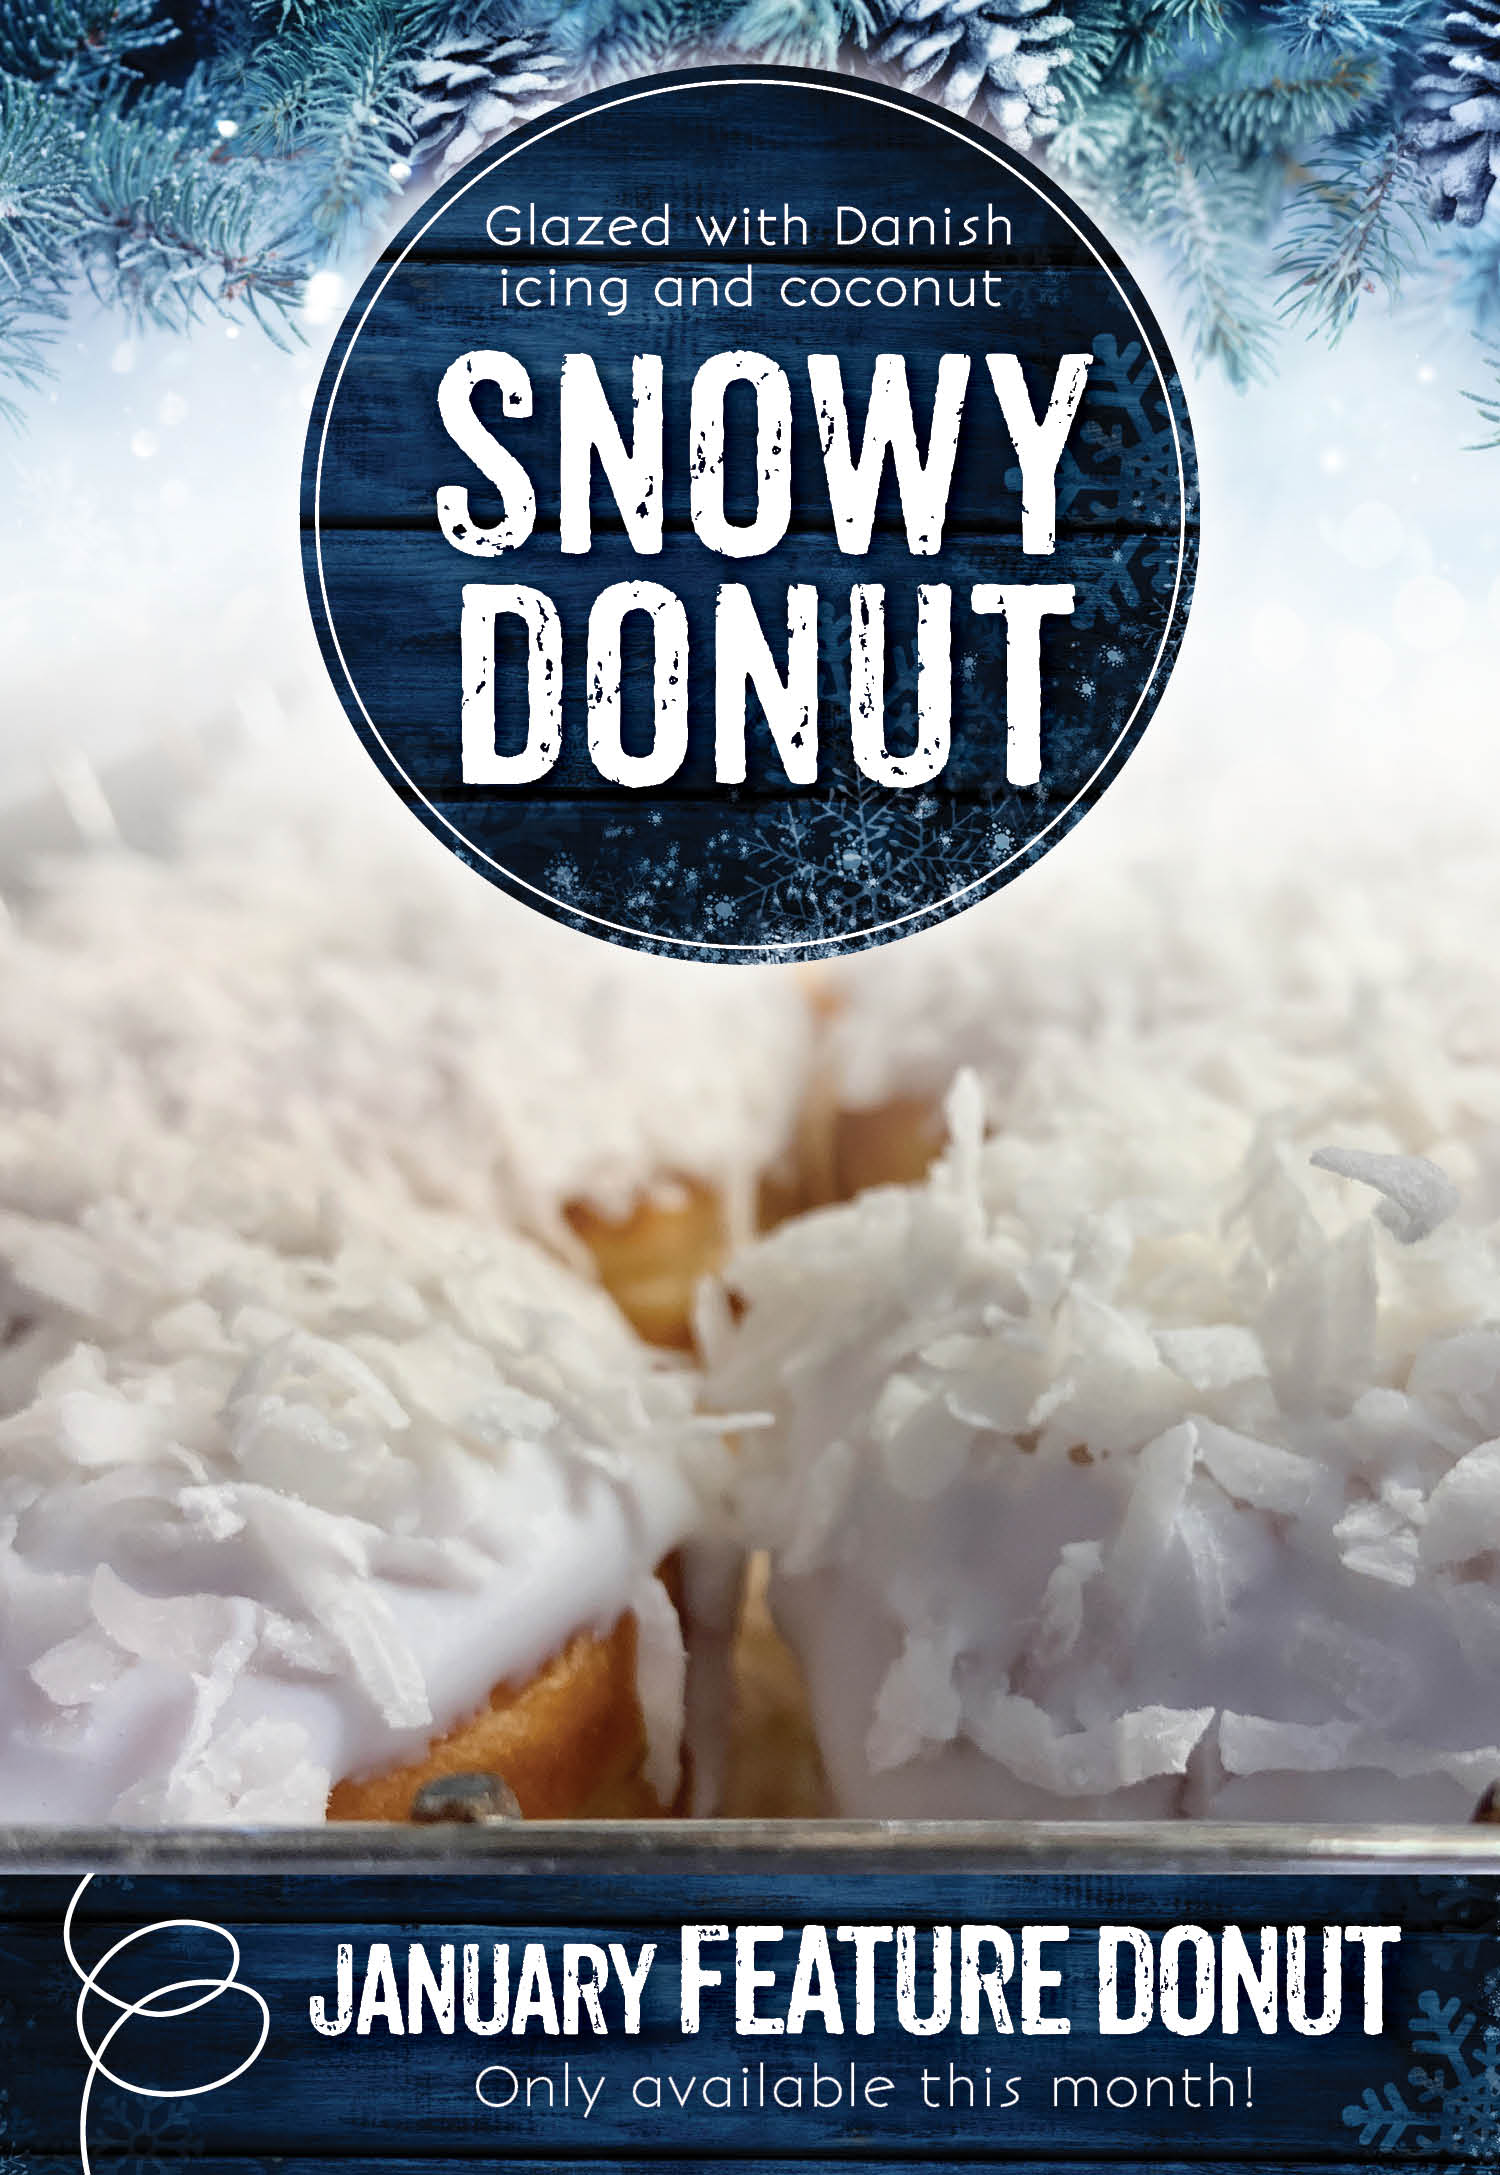 Snowy Donuts at the Invermere Bakery!